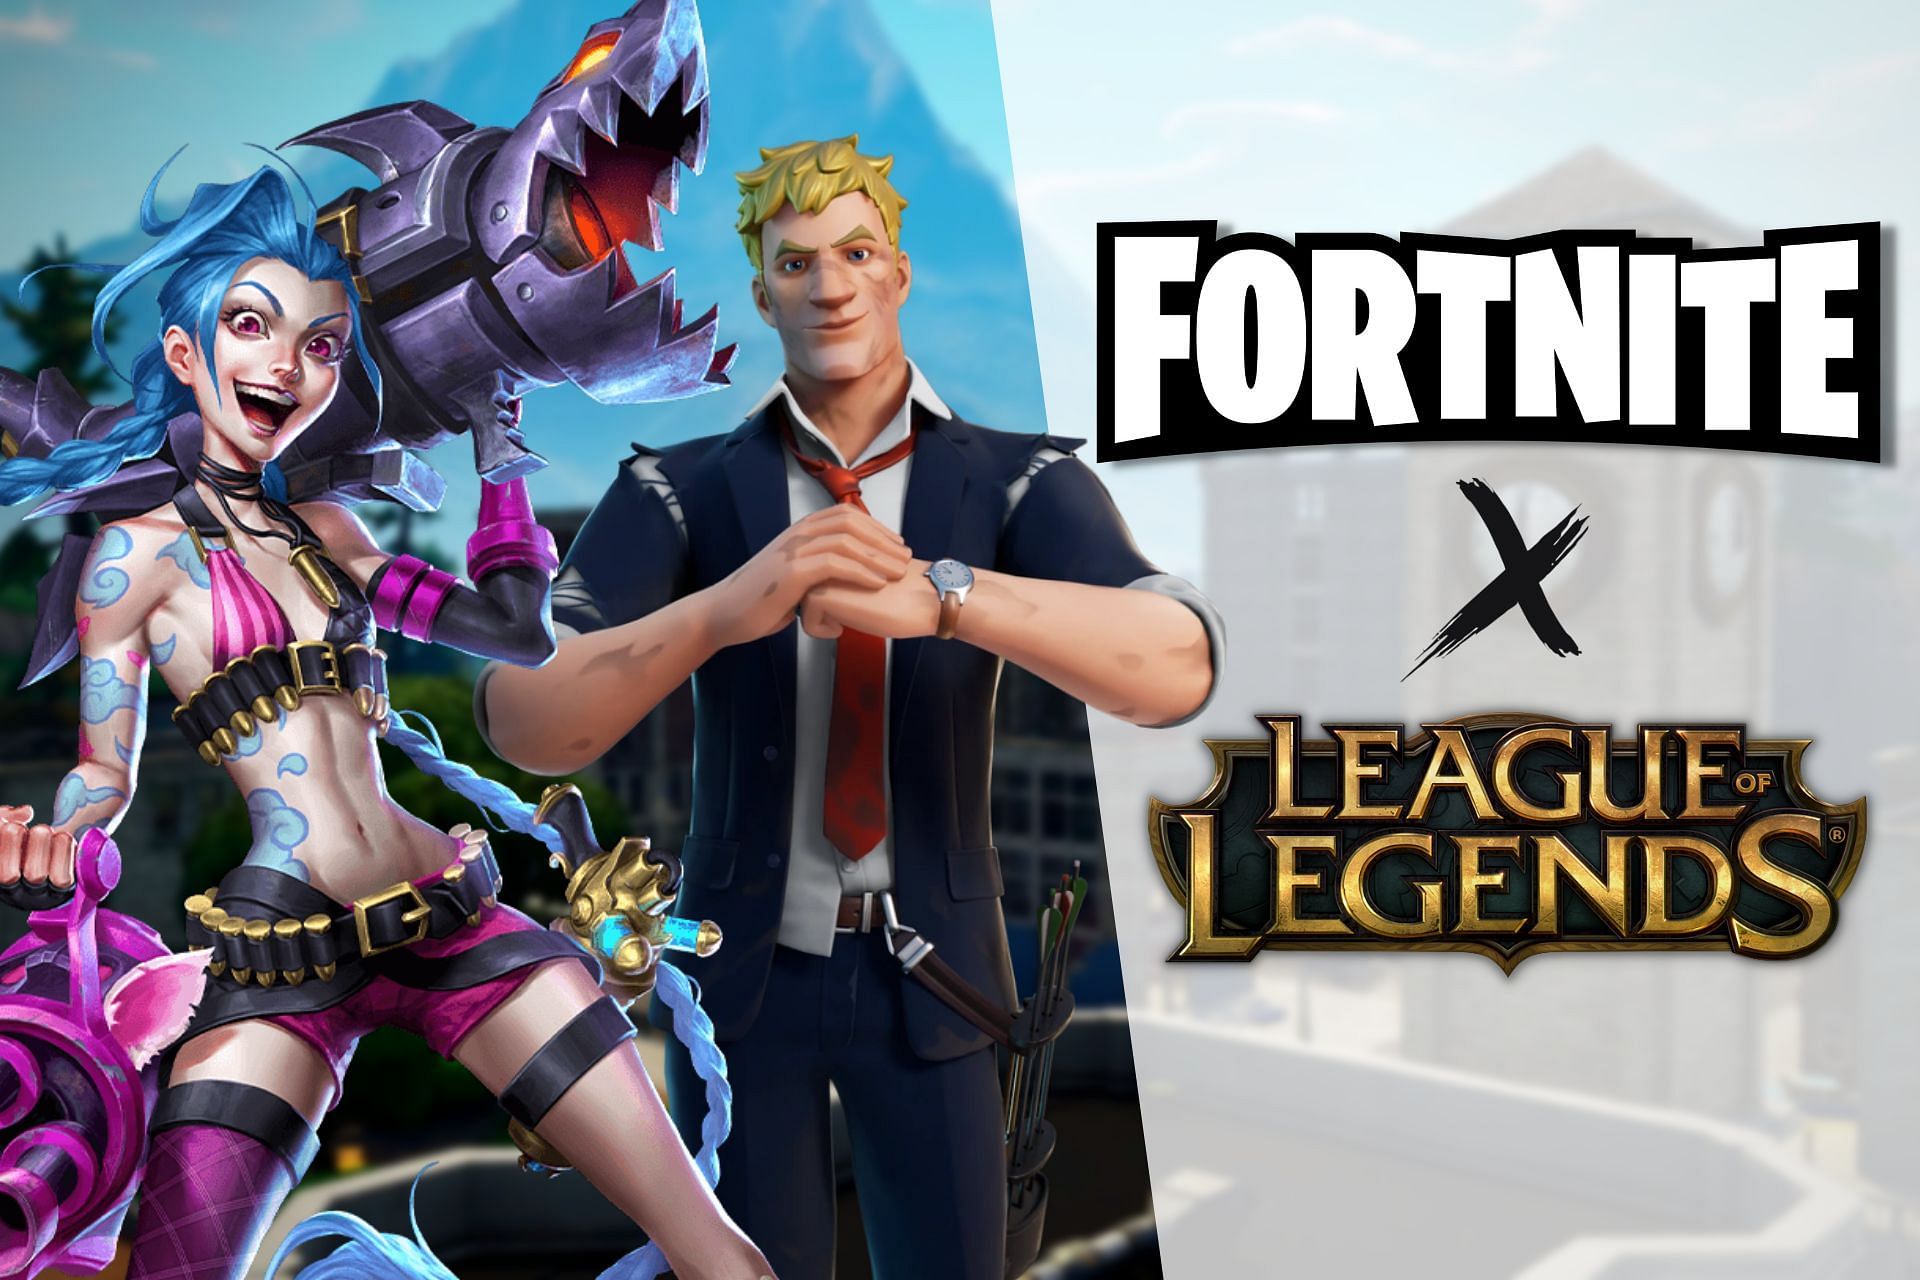 A new leak suggests that a Fortnite x League of Legends colllab is coming to Season 8 (Image via Sportskeeda)